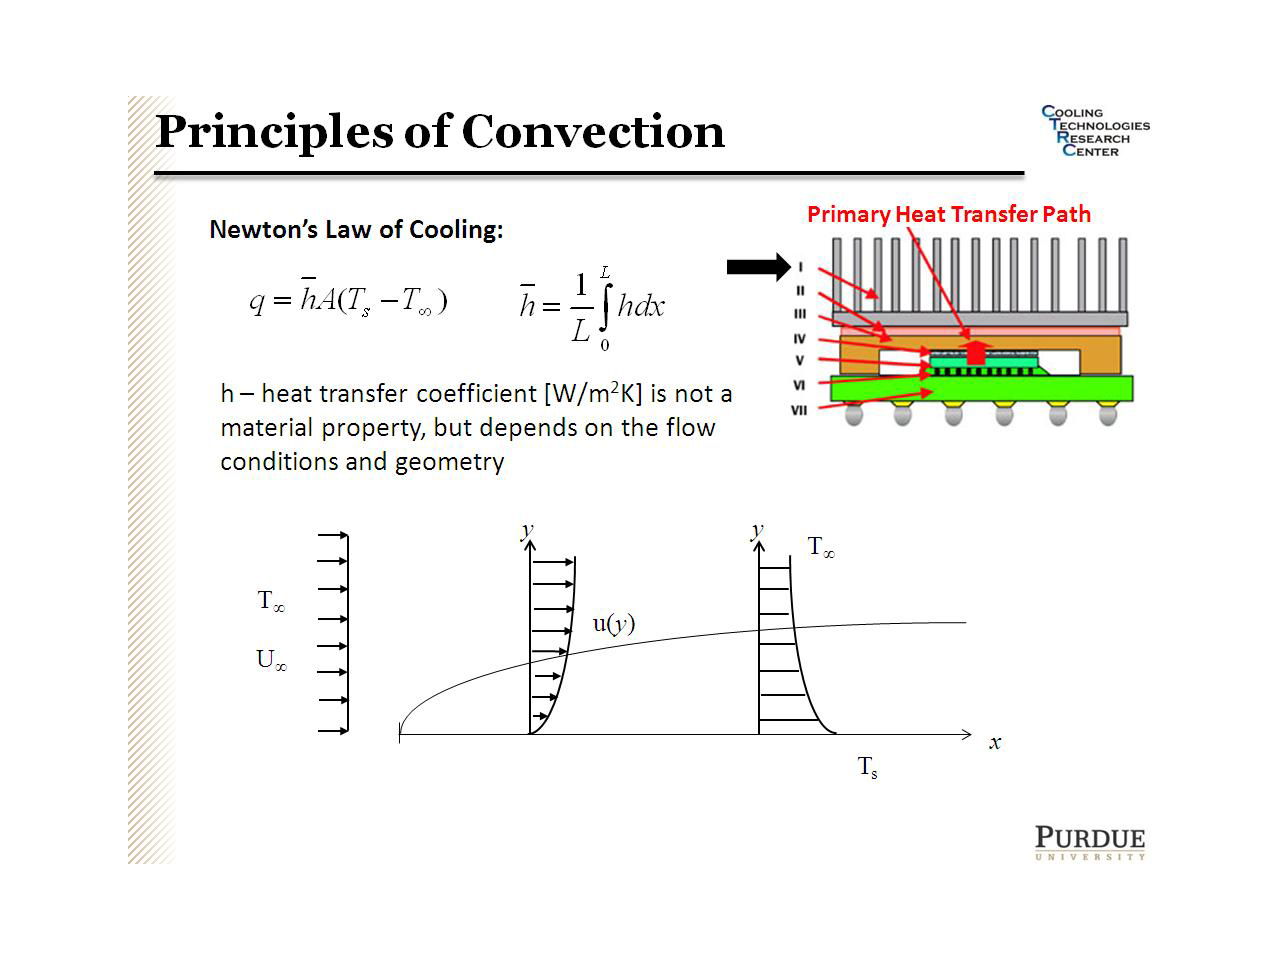 Principles of Convection